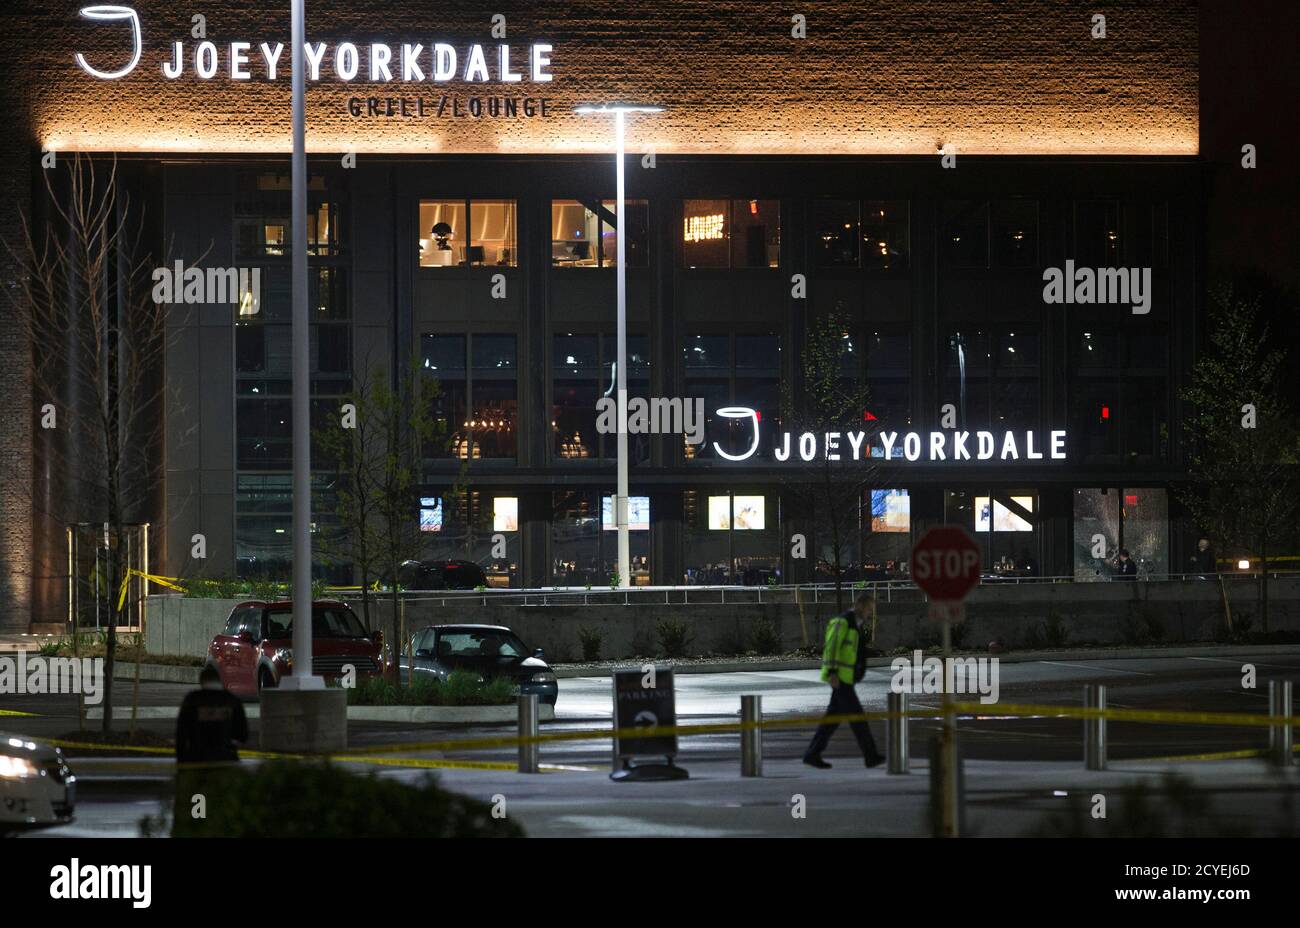 Security guards and police officers stand in front of the Joey Yorkdale restaurant where gunshots were fired at the Yorkdale shopping mall in Toronto May 11, 2013. One man has been sent to a local hospital with injuries following the incident, local media said.  REUTERS/Mark Blinch (CANADA - Tags: CRIME LAW) Stock Photo